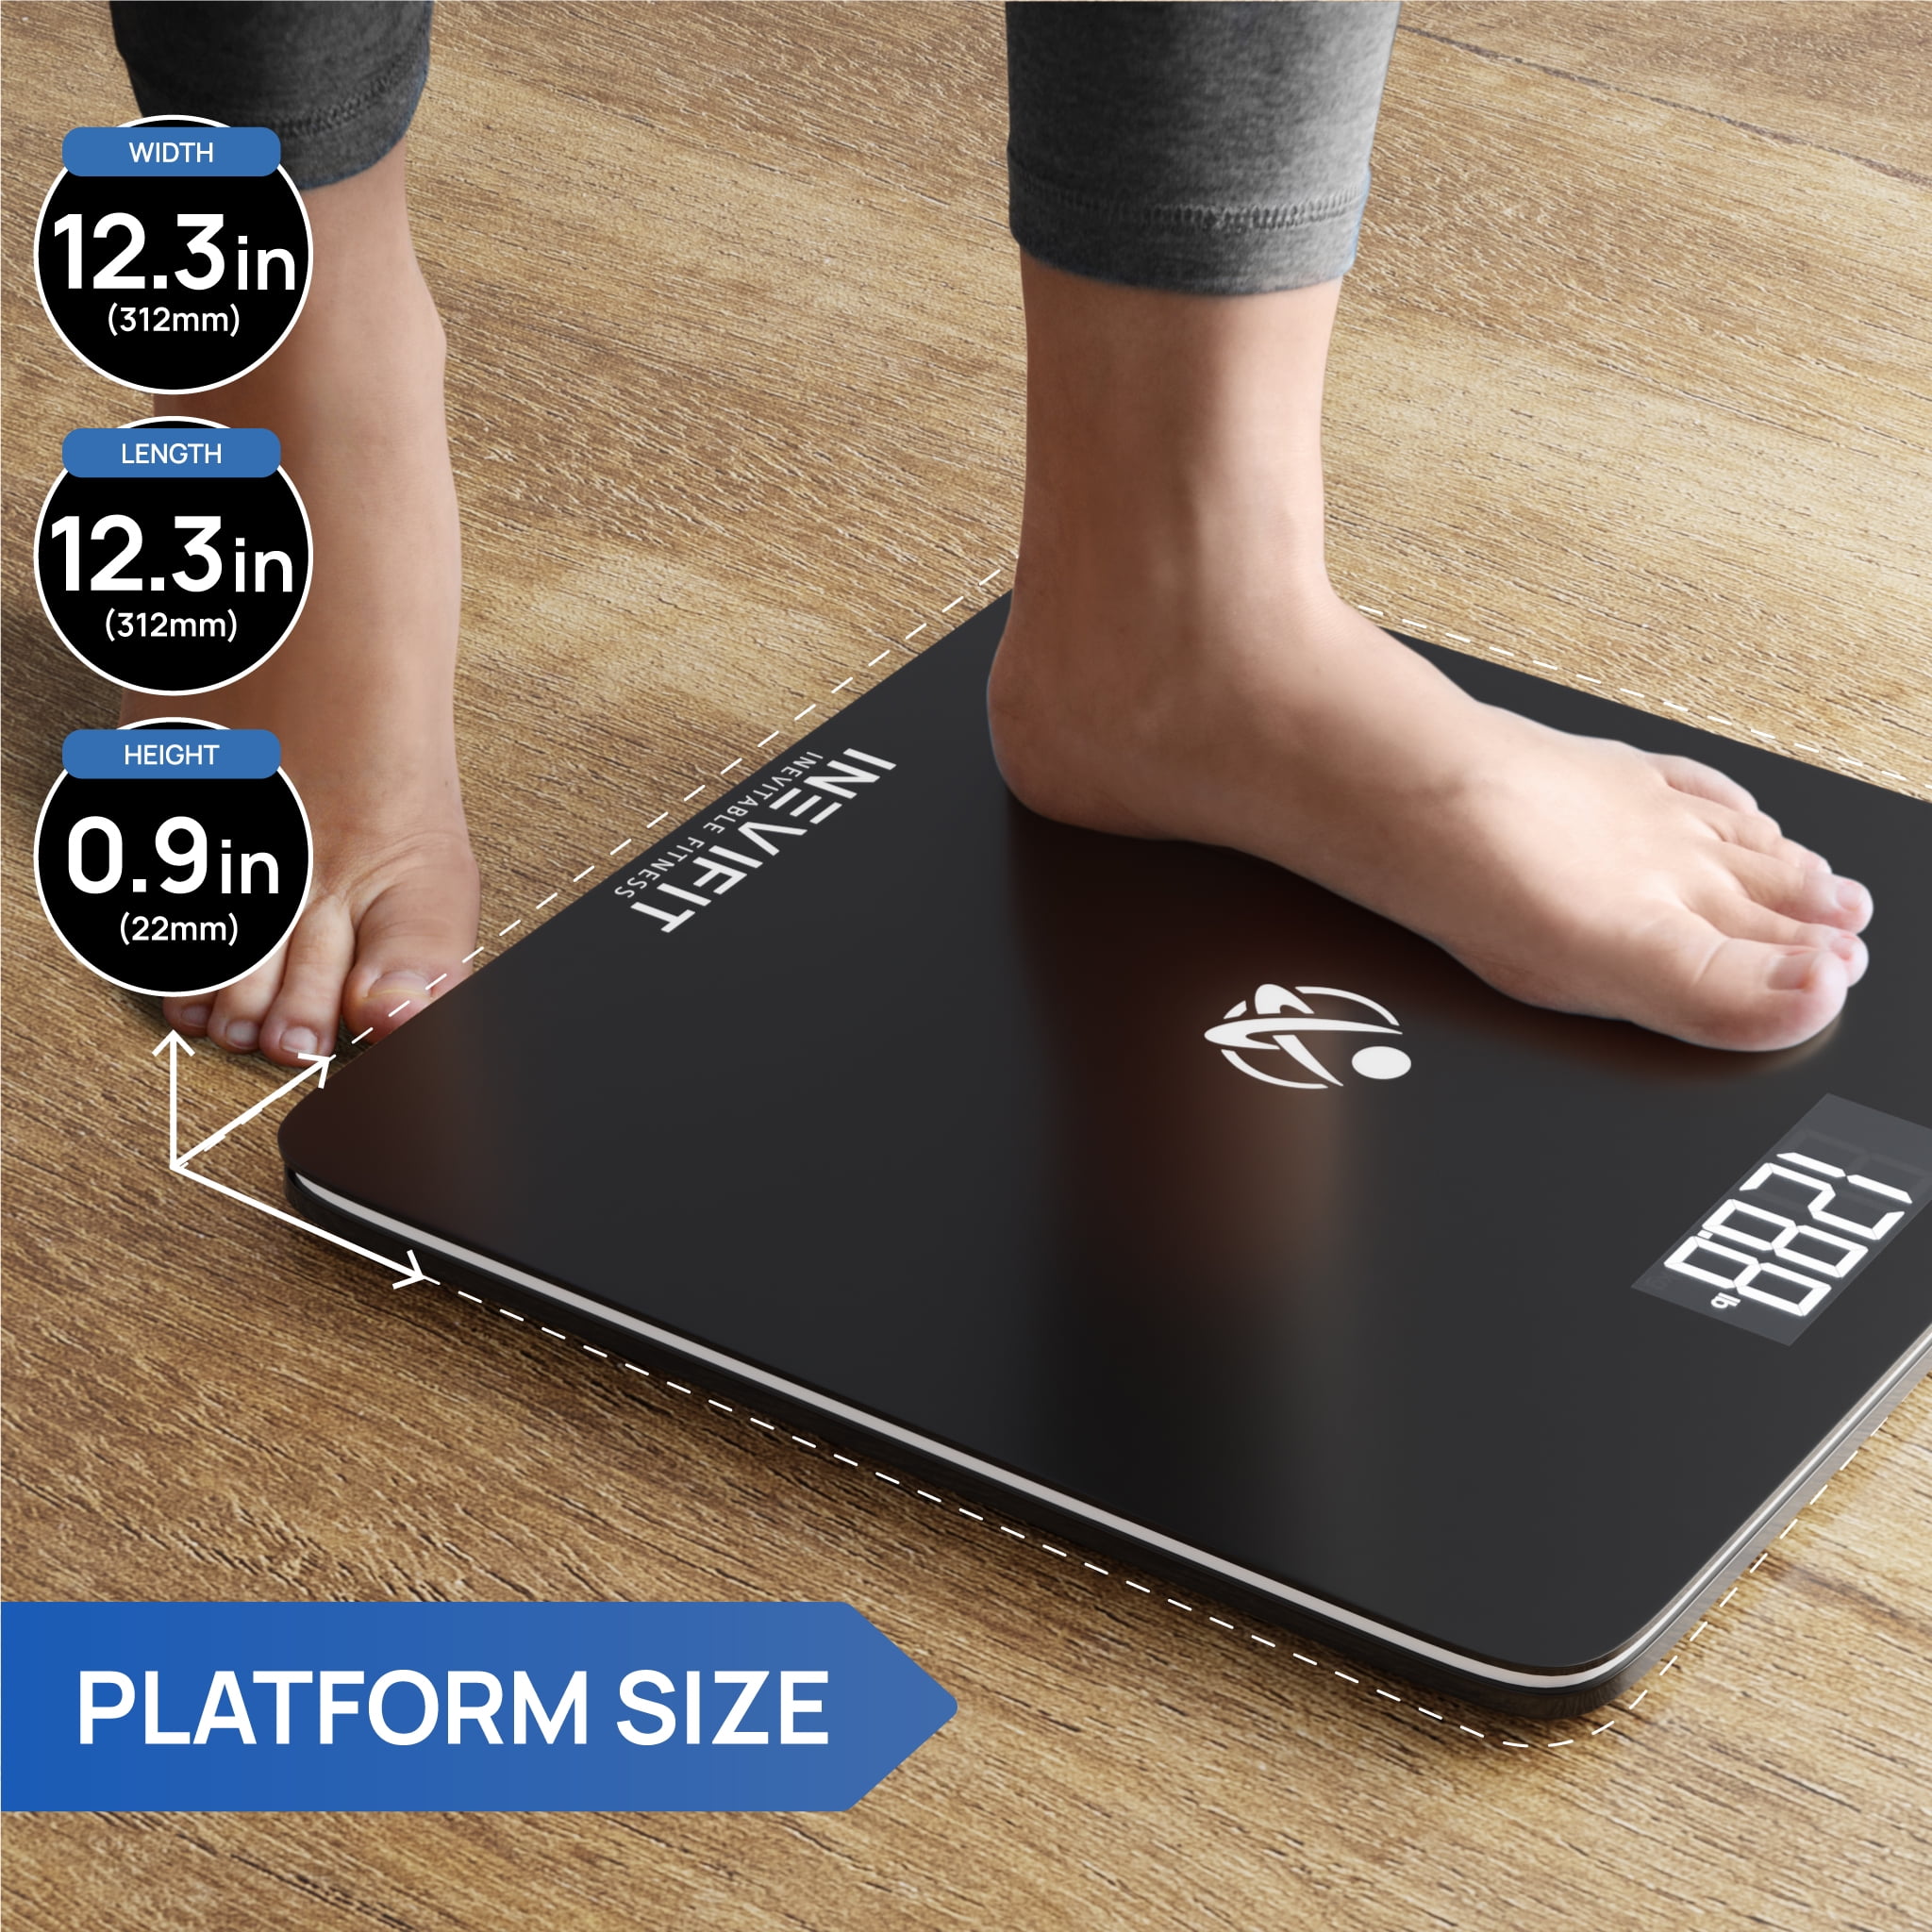  INEVIFIT Bathroom Scale, Highly Accurate Digital Bathroom Body  Scale, Measures Weight up to 400 lbs. Includes Batteries : inevifit: Health  & Household